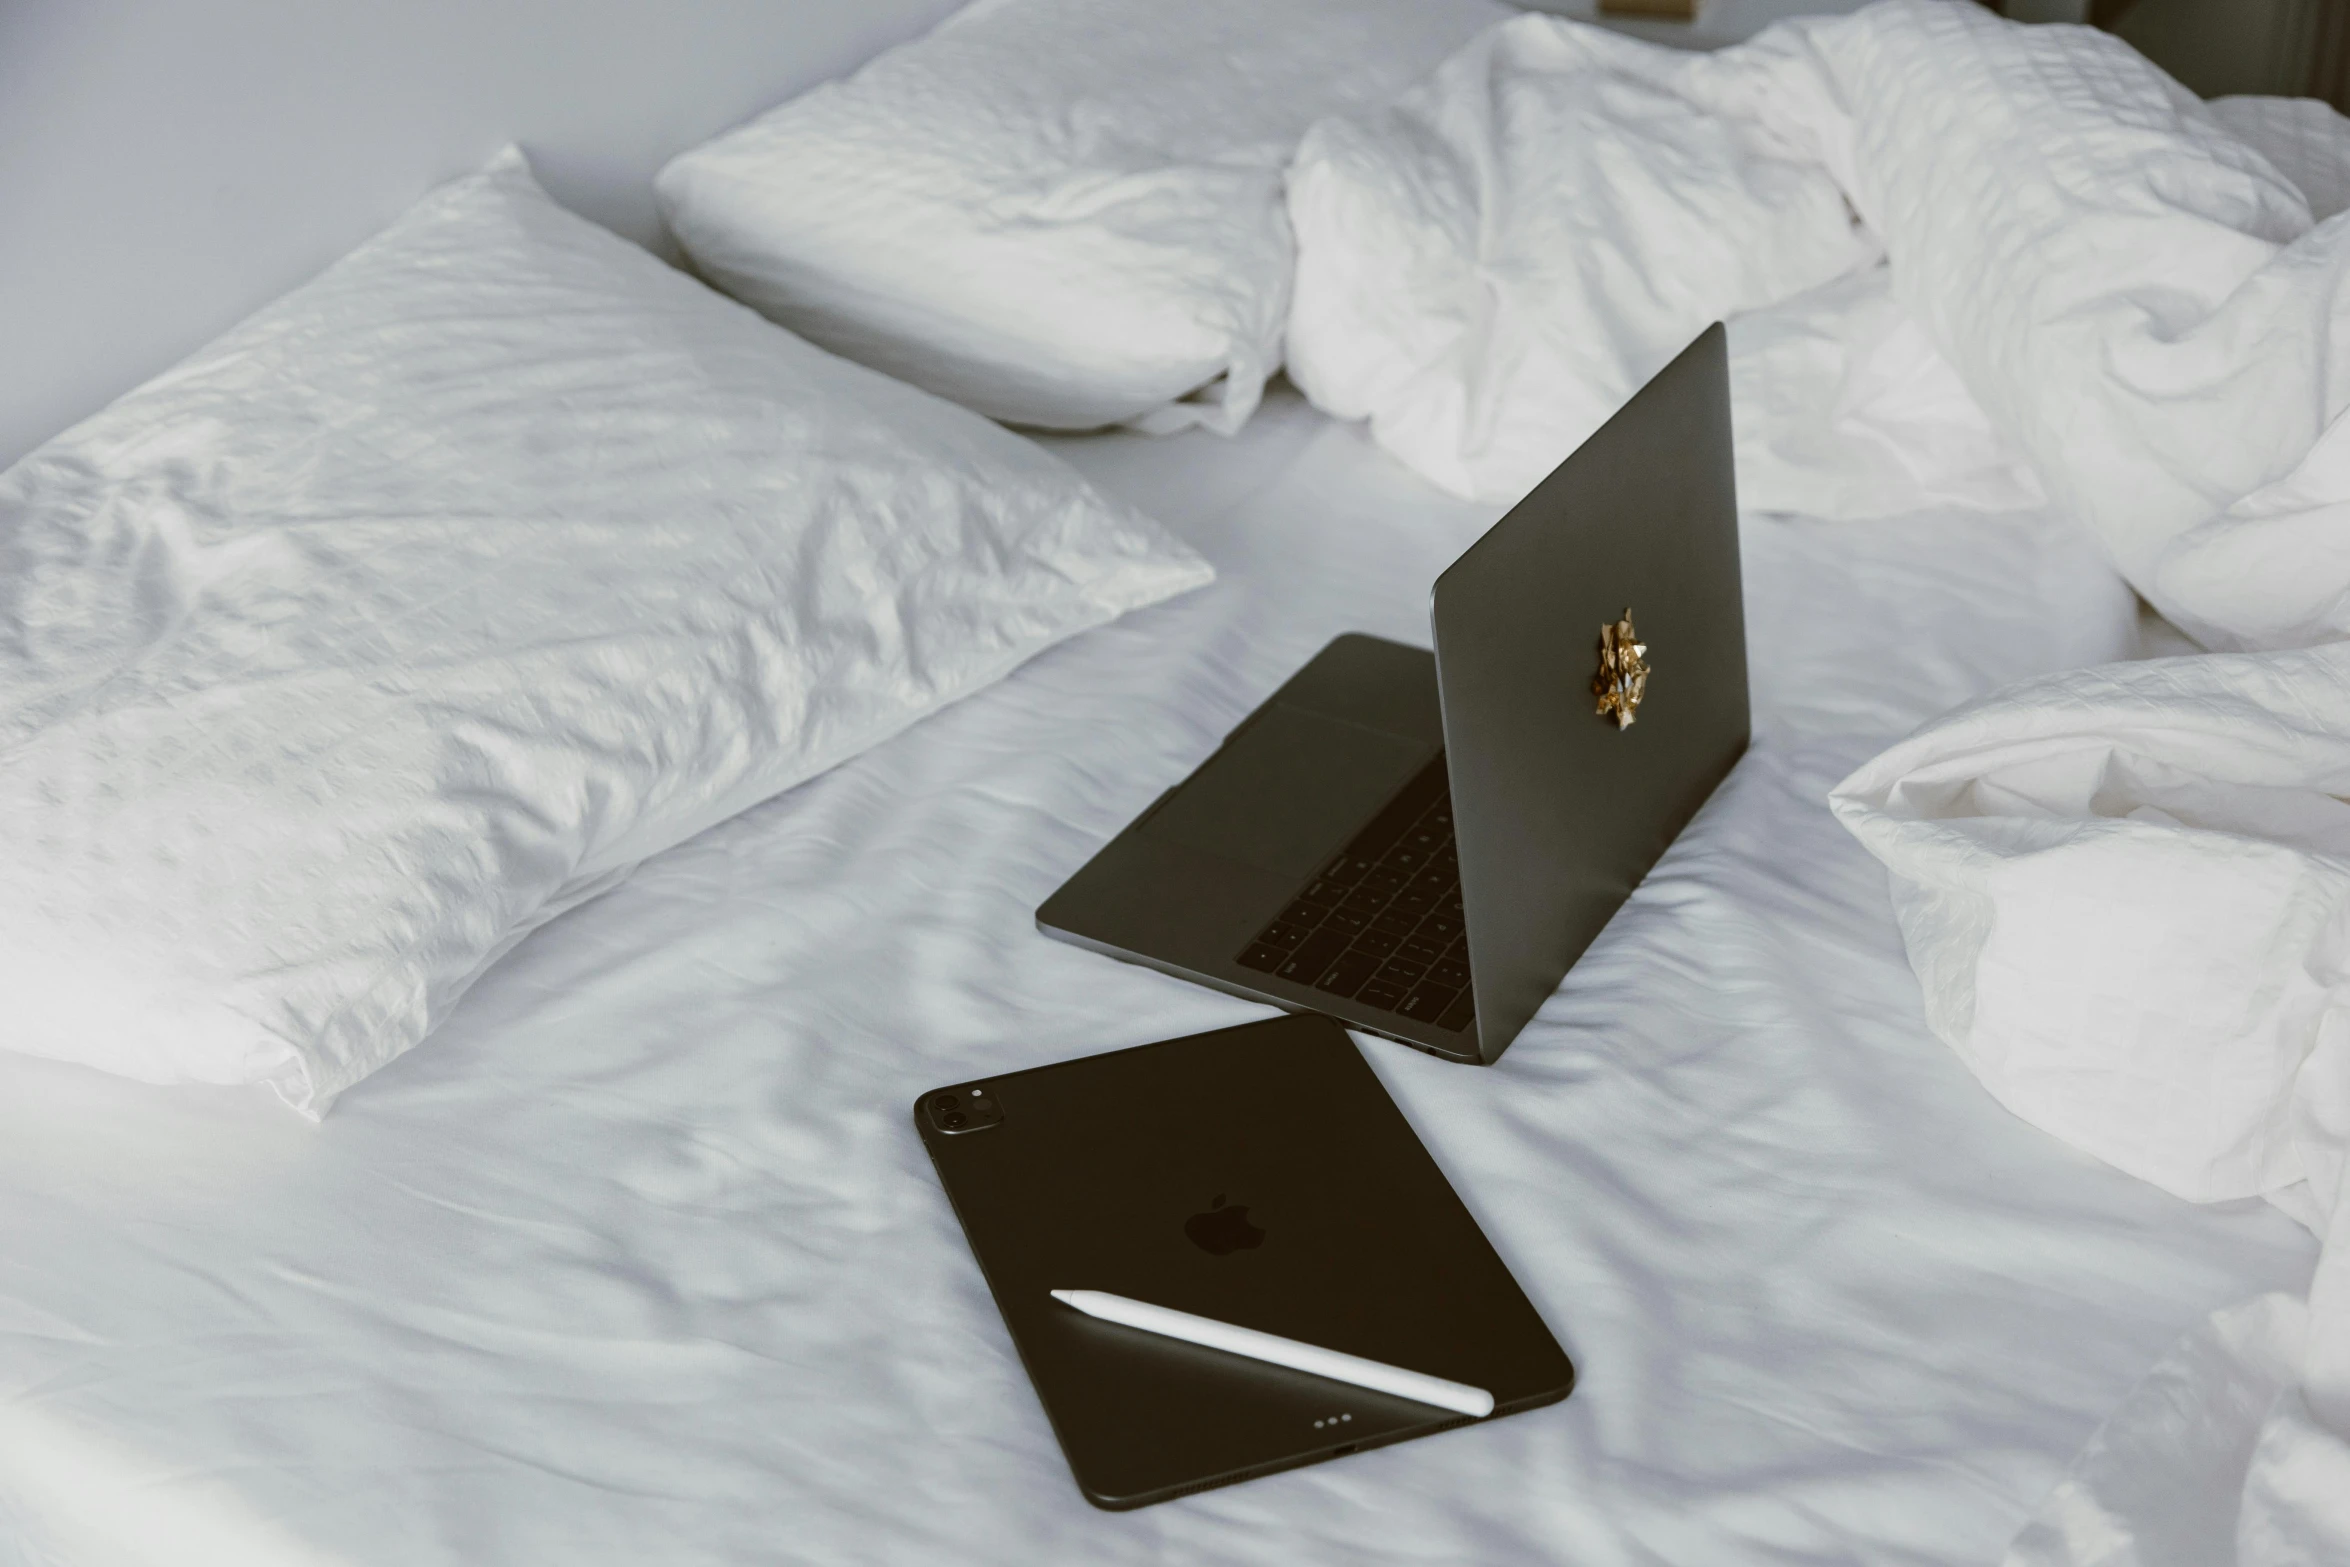 two laptops sitting on a white bed with blankets on it